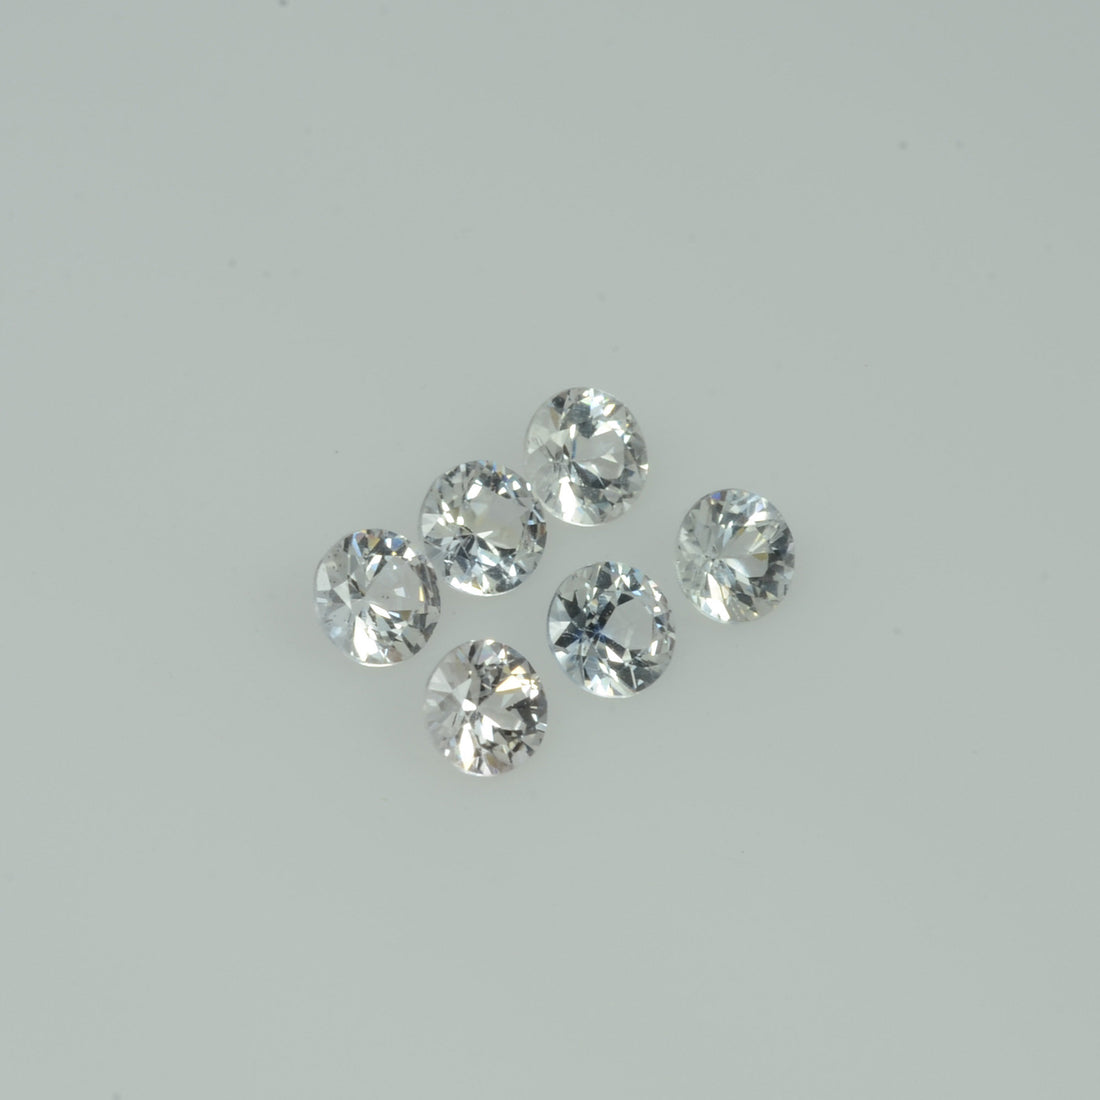 3.5-4 mm Natural Whitish Yellow  Sapphire Loose Gemstone Round Diamond Cut Cleanish  Quality A+ Color - Thai Gems Export Ltd.